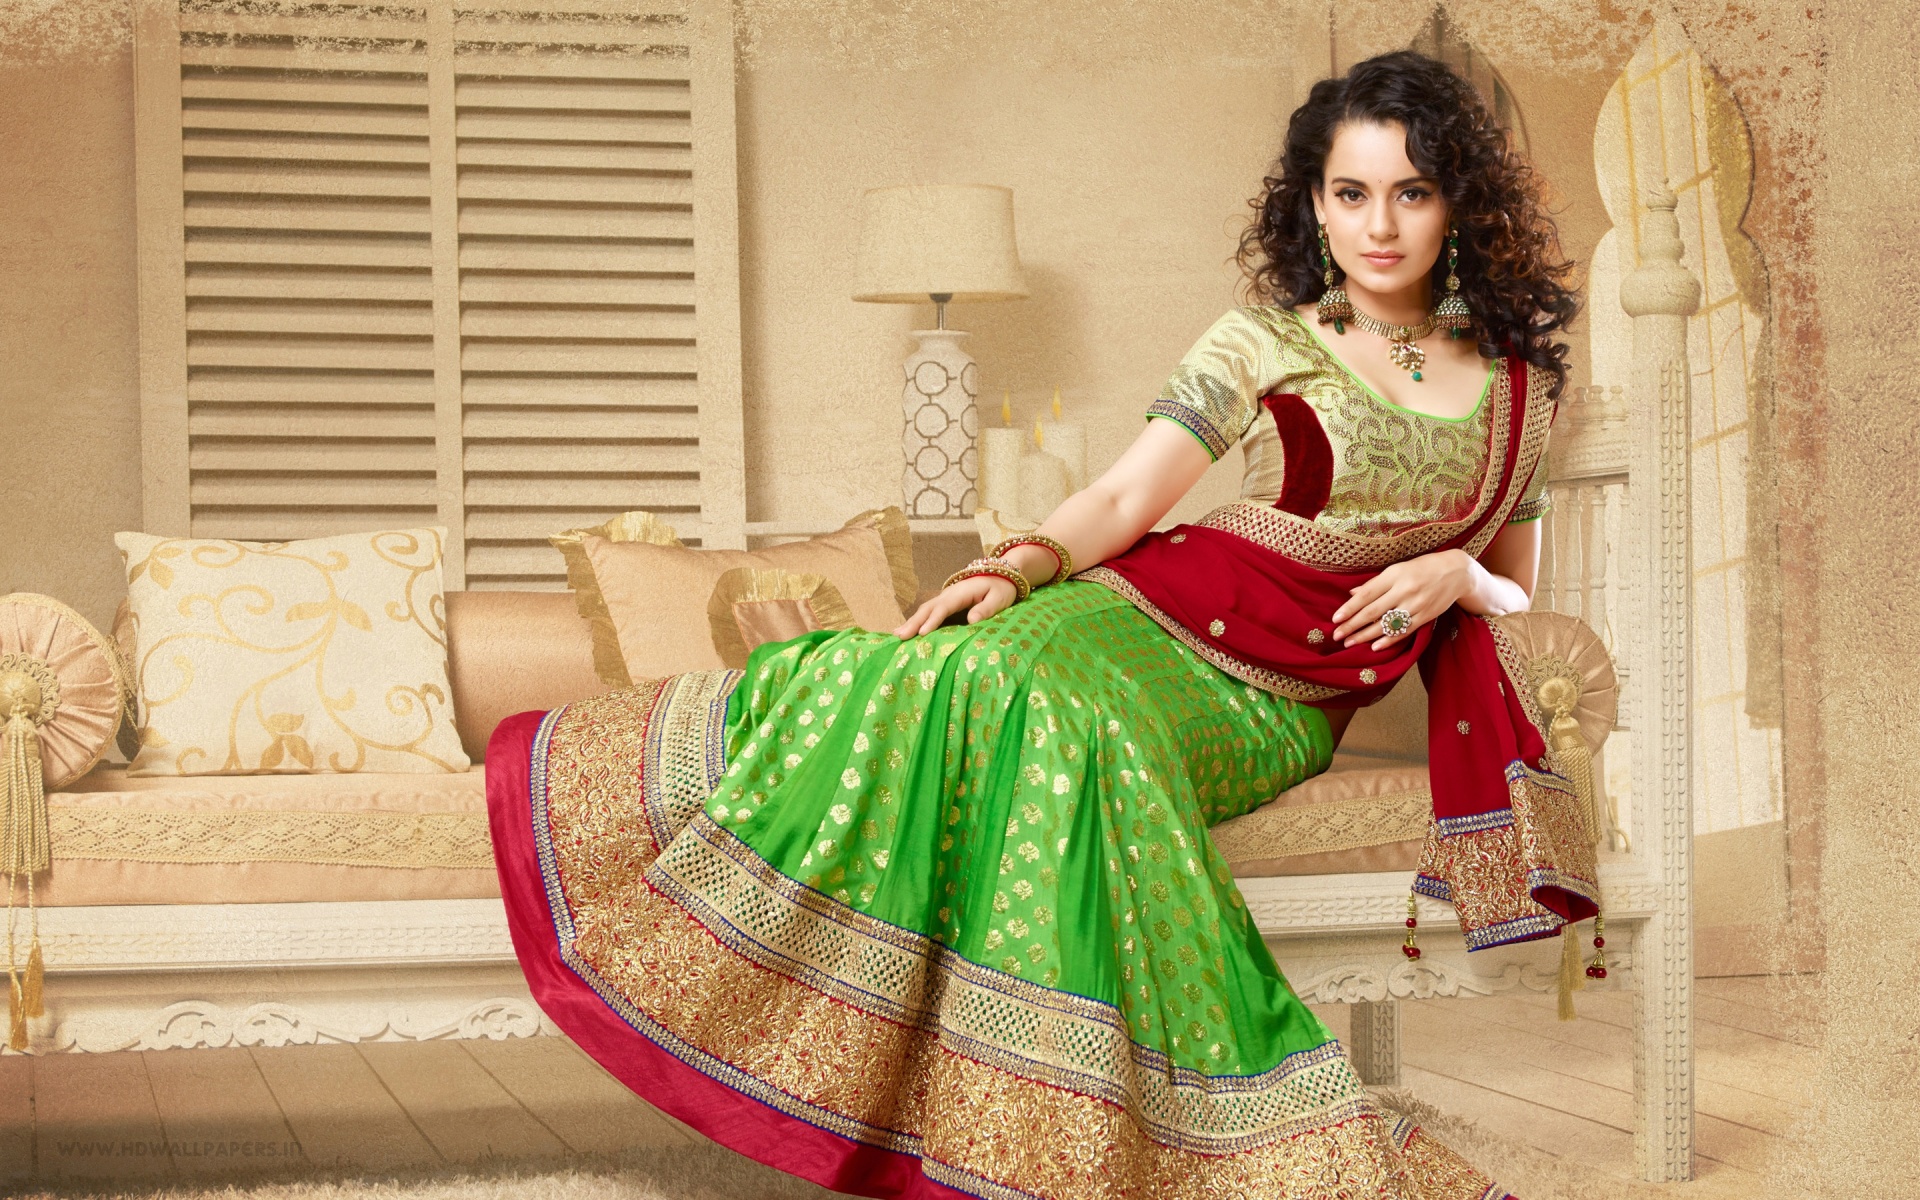 40+ Kangana Ranaut New Top Best Images And Wallpapers HD - Cinejolly